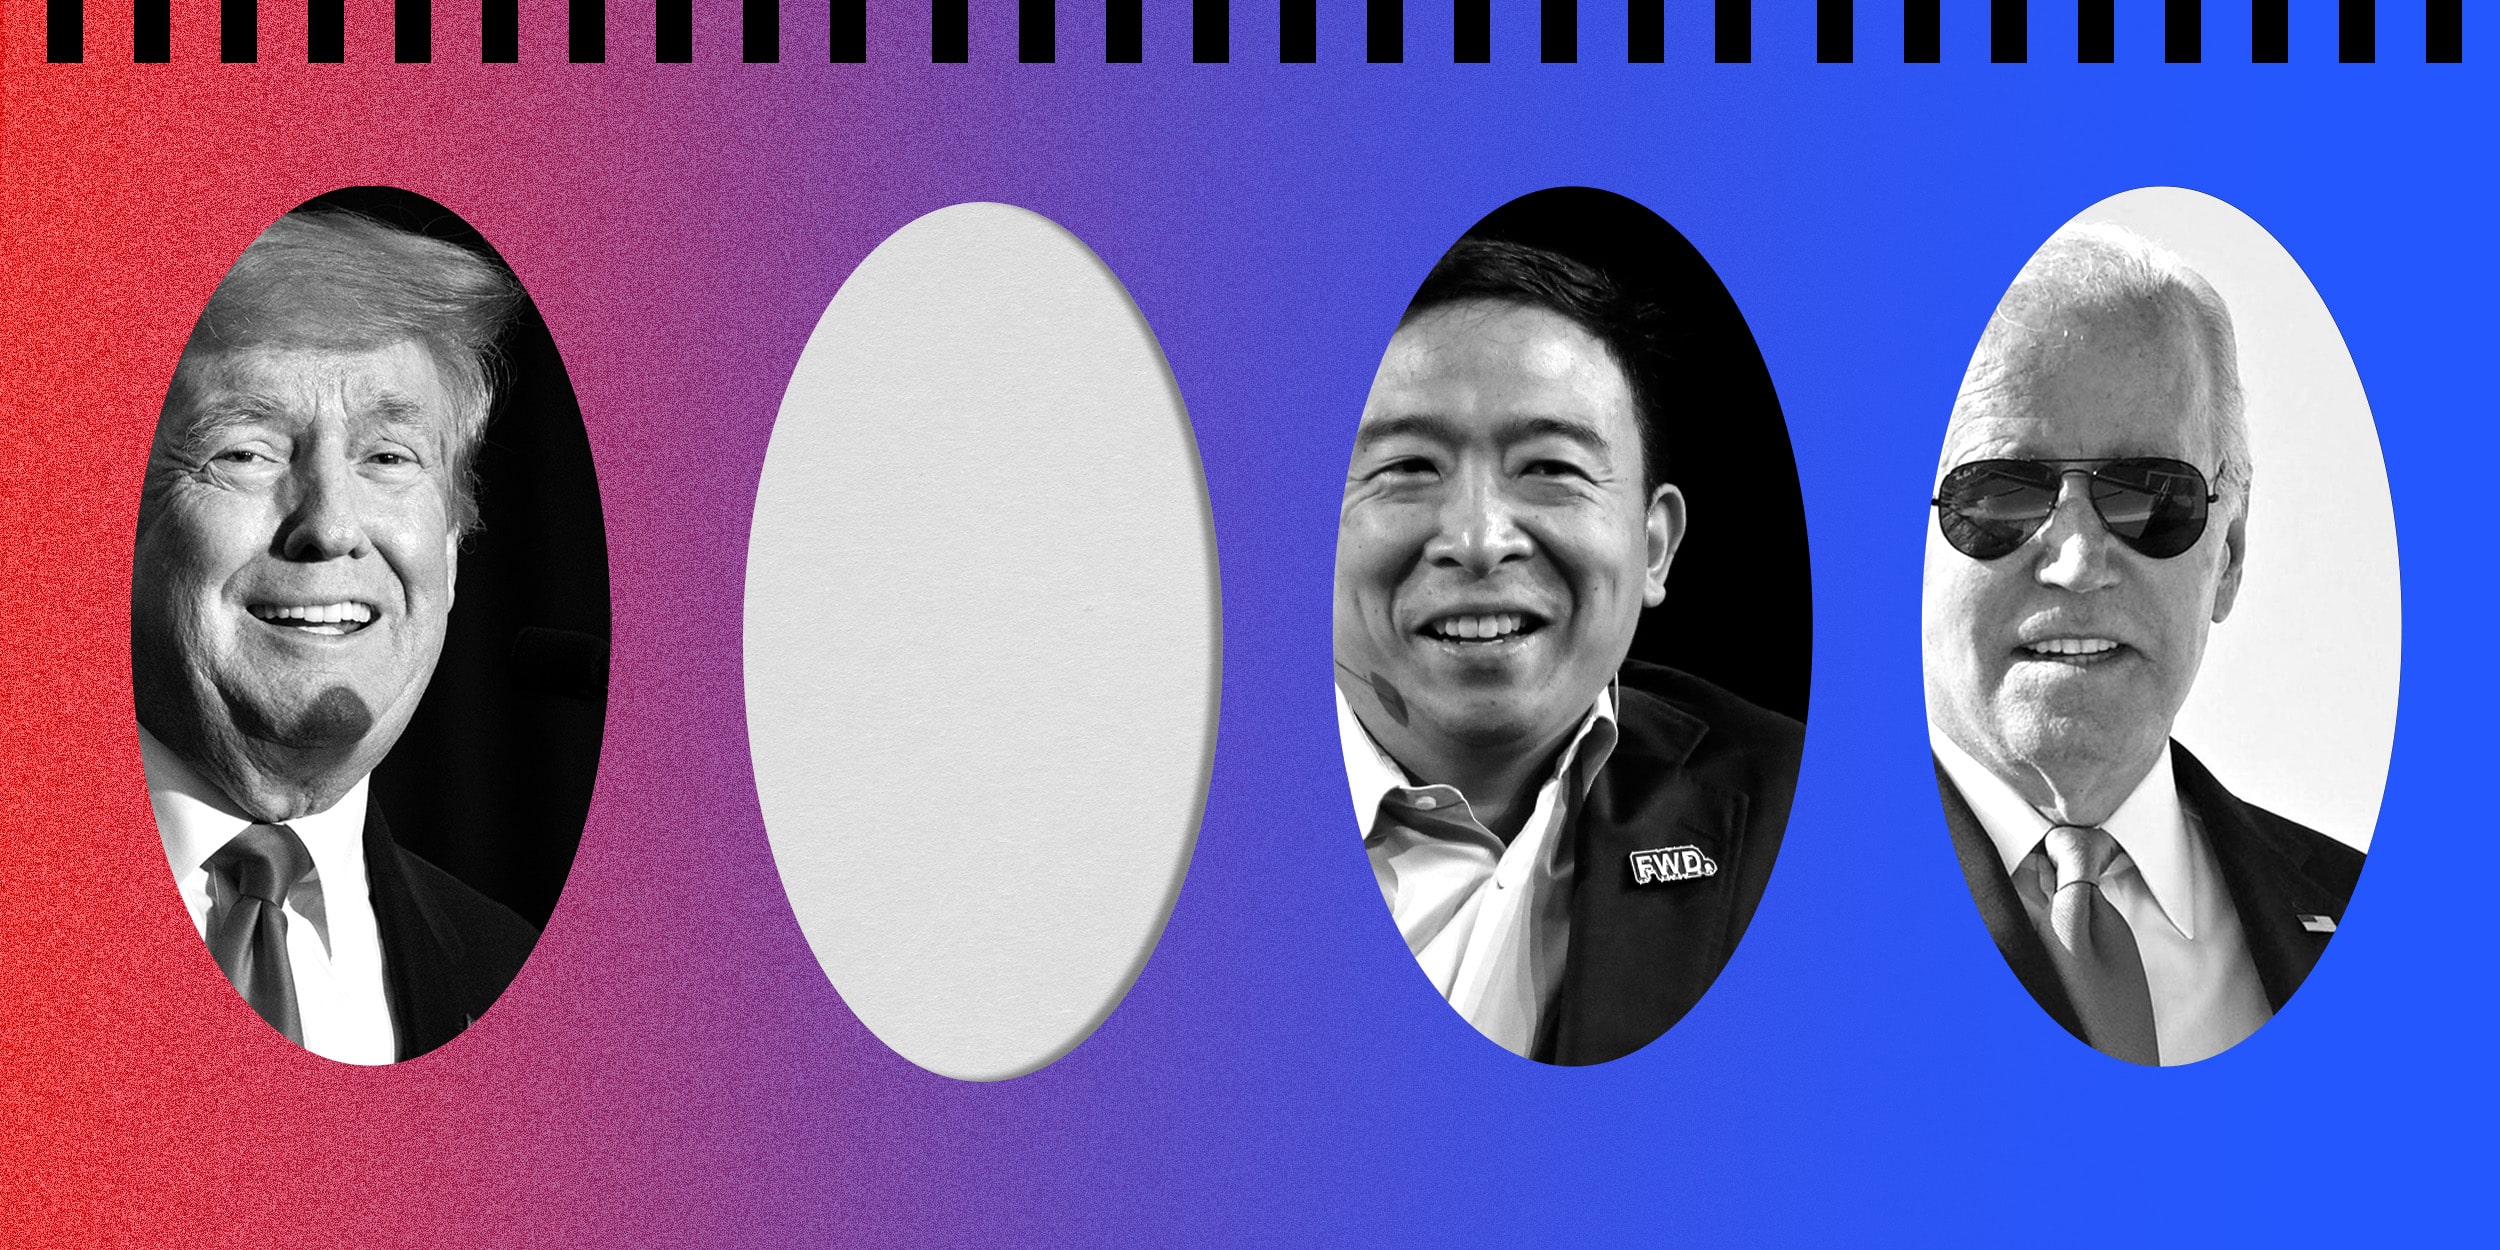 Andrew Yang with Donald Trump and Joe Biden with open space for another third party candidate